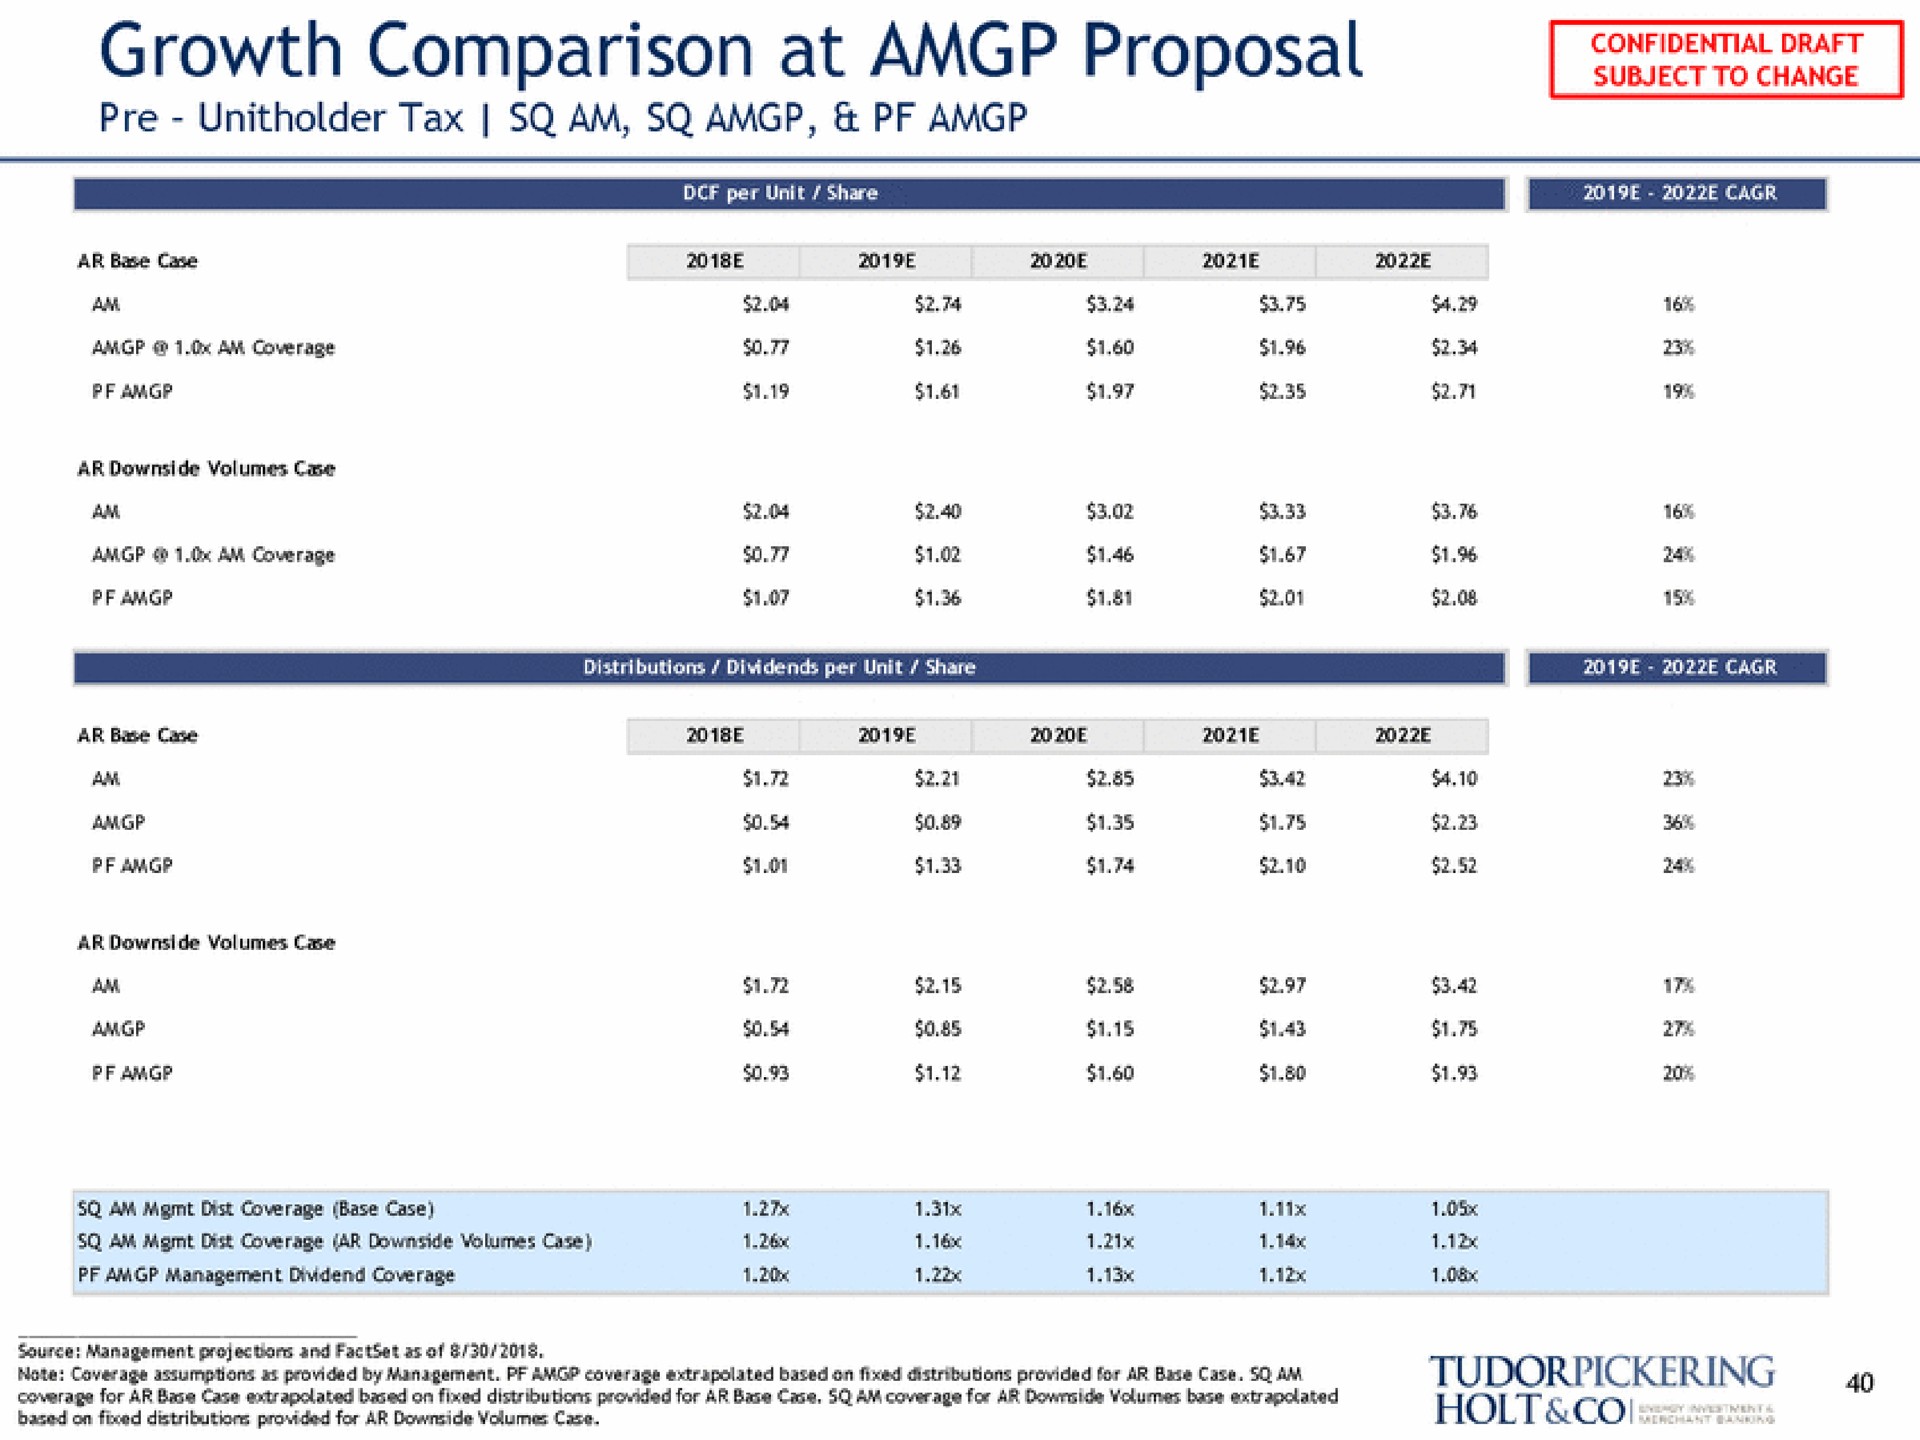 growth comparison at proposal tax am | Tudor, Pickering, Holt & Co